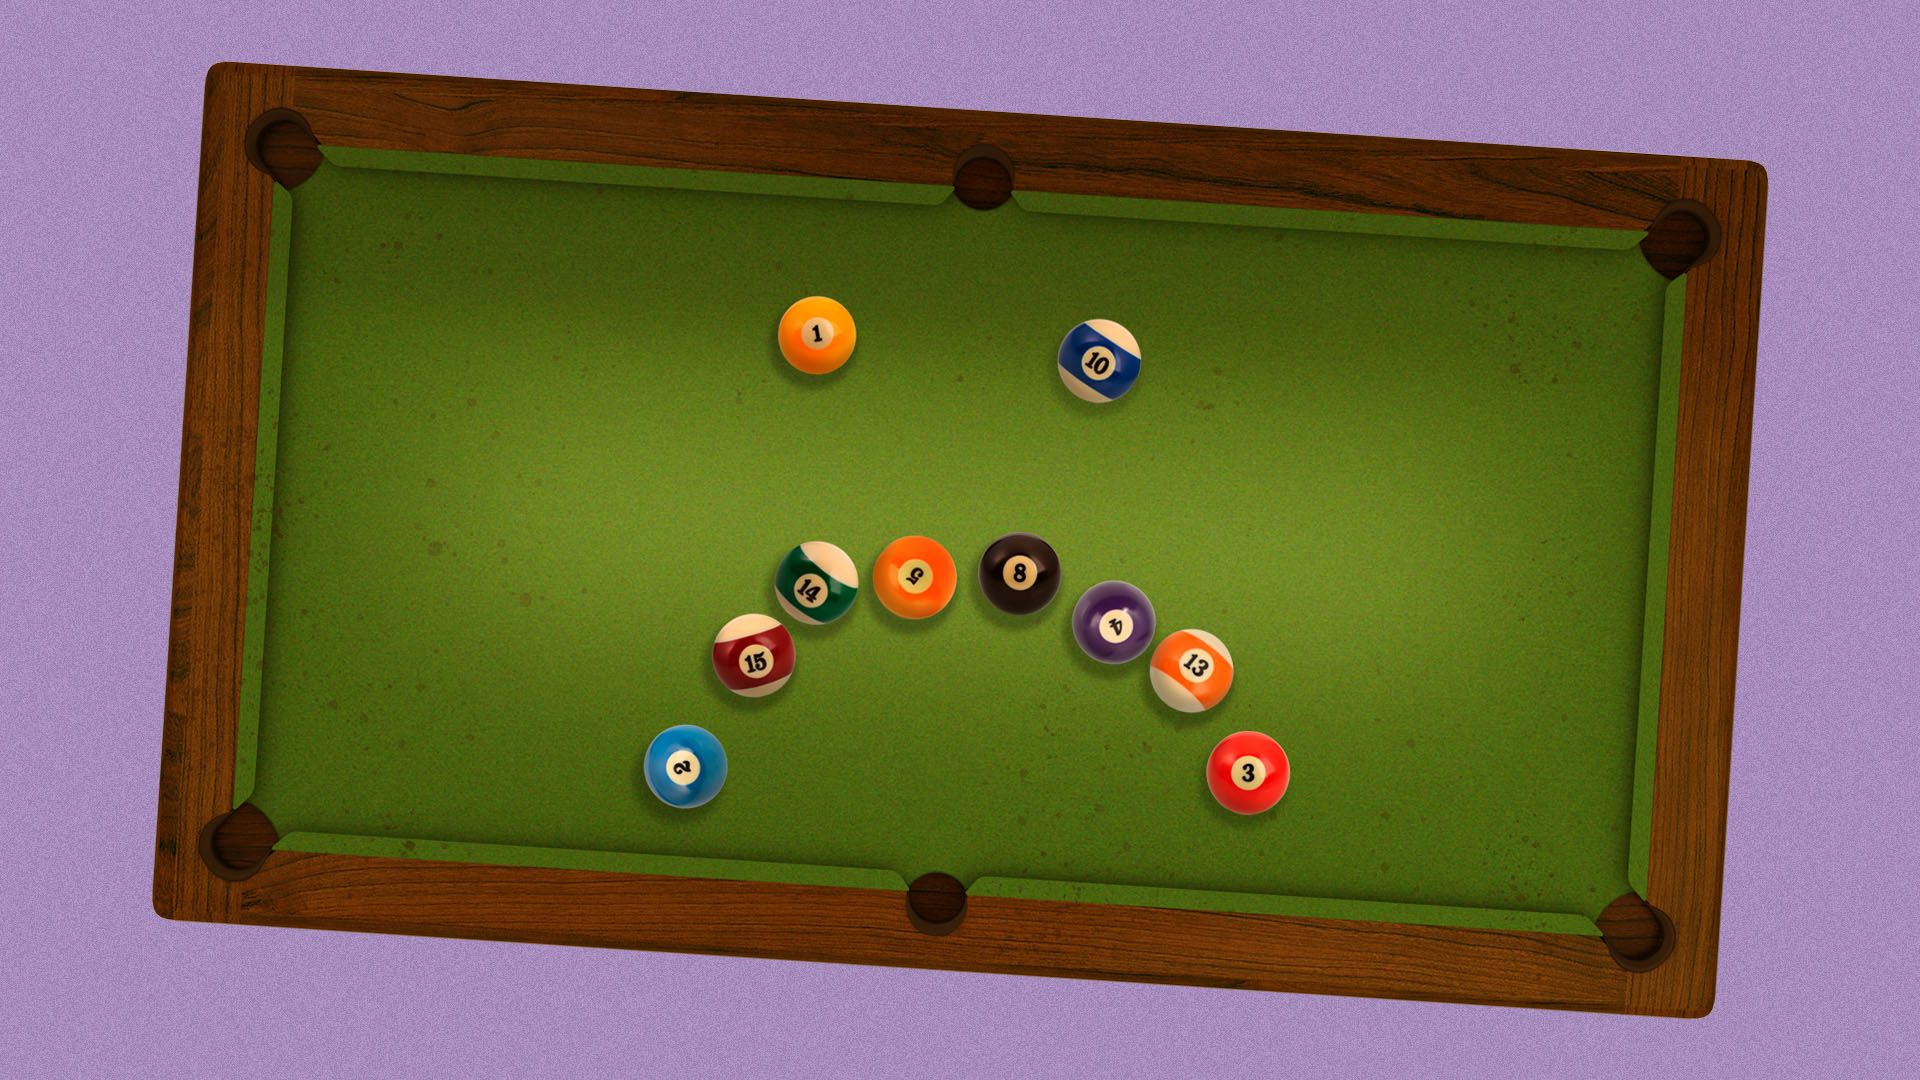 Illustration of pool table with the pool balls shaped like a frowny face